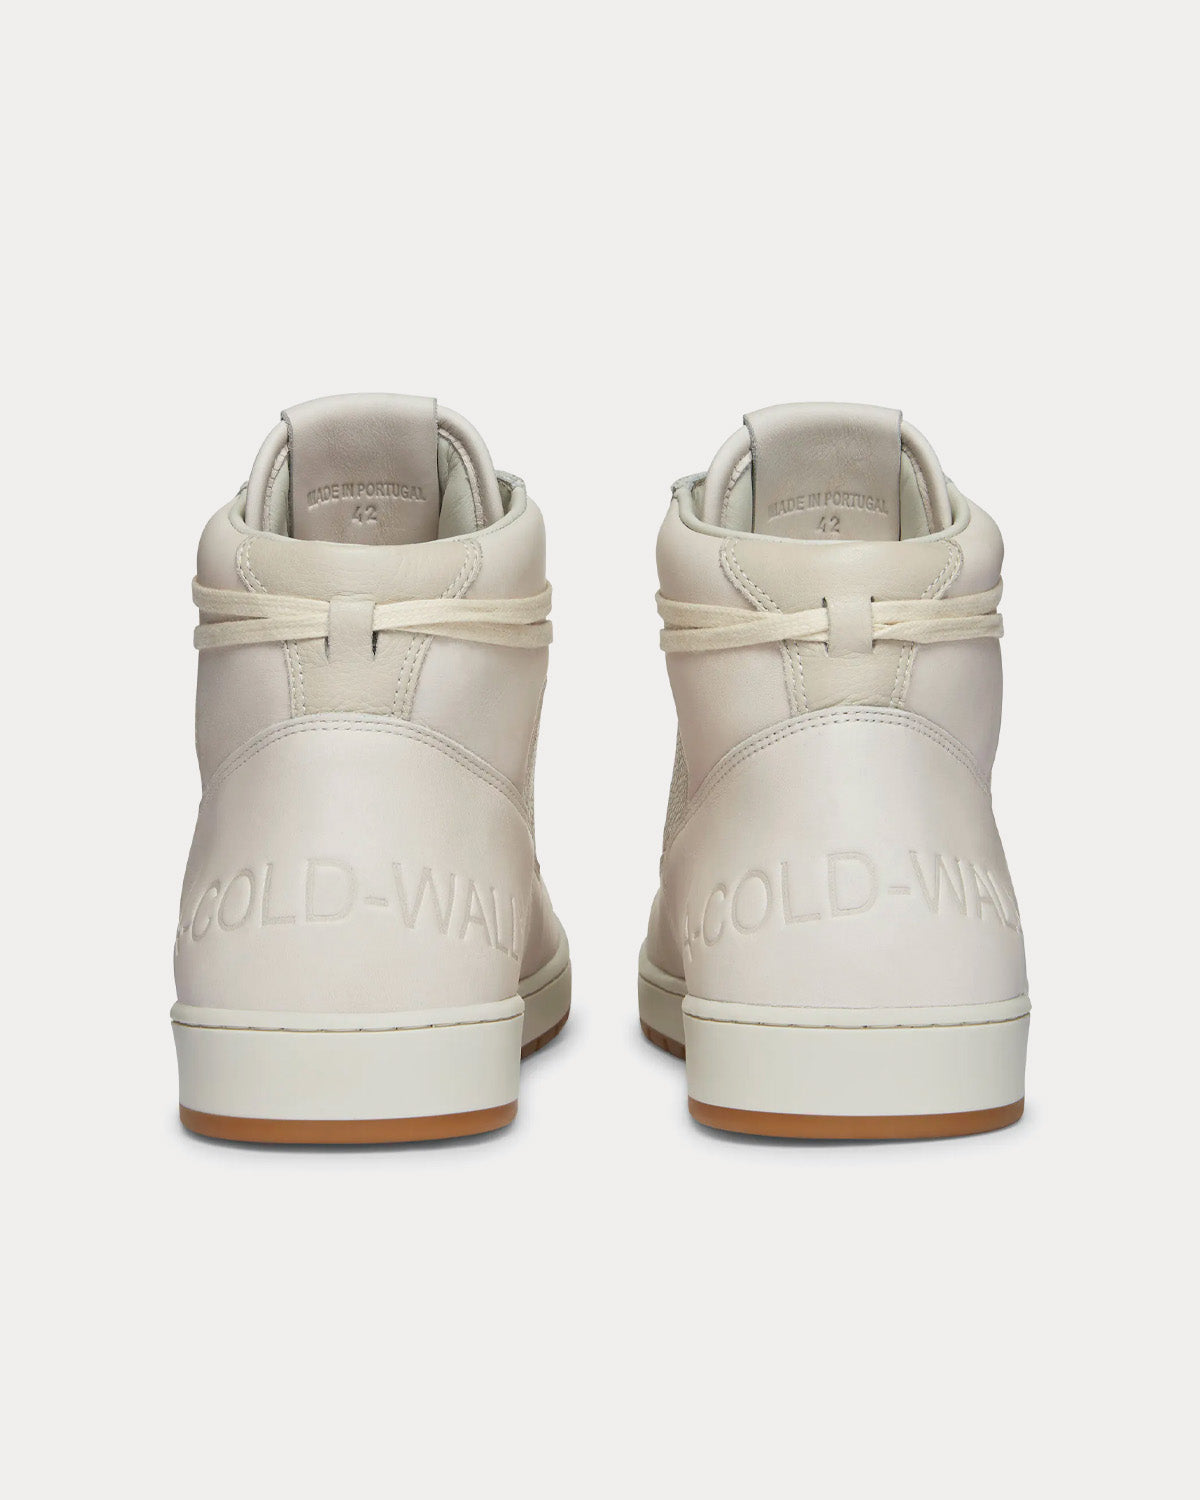 A-COLD-WALL* - Luol Leather Tan High Top Sneakers